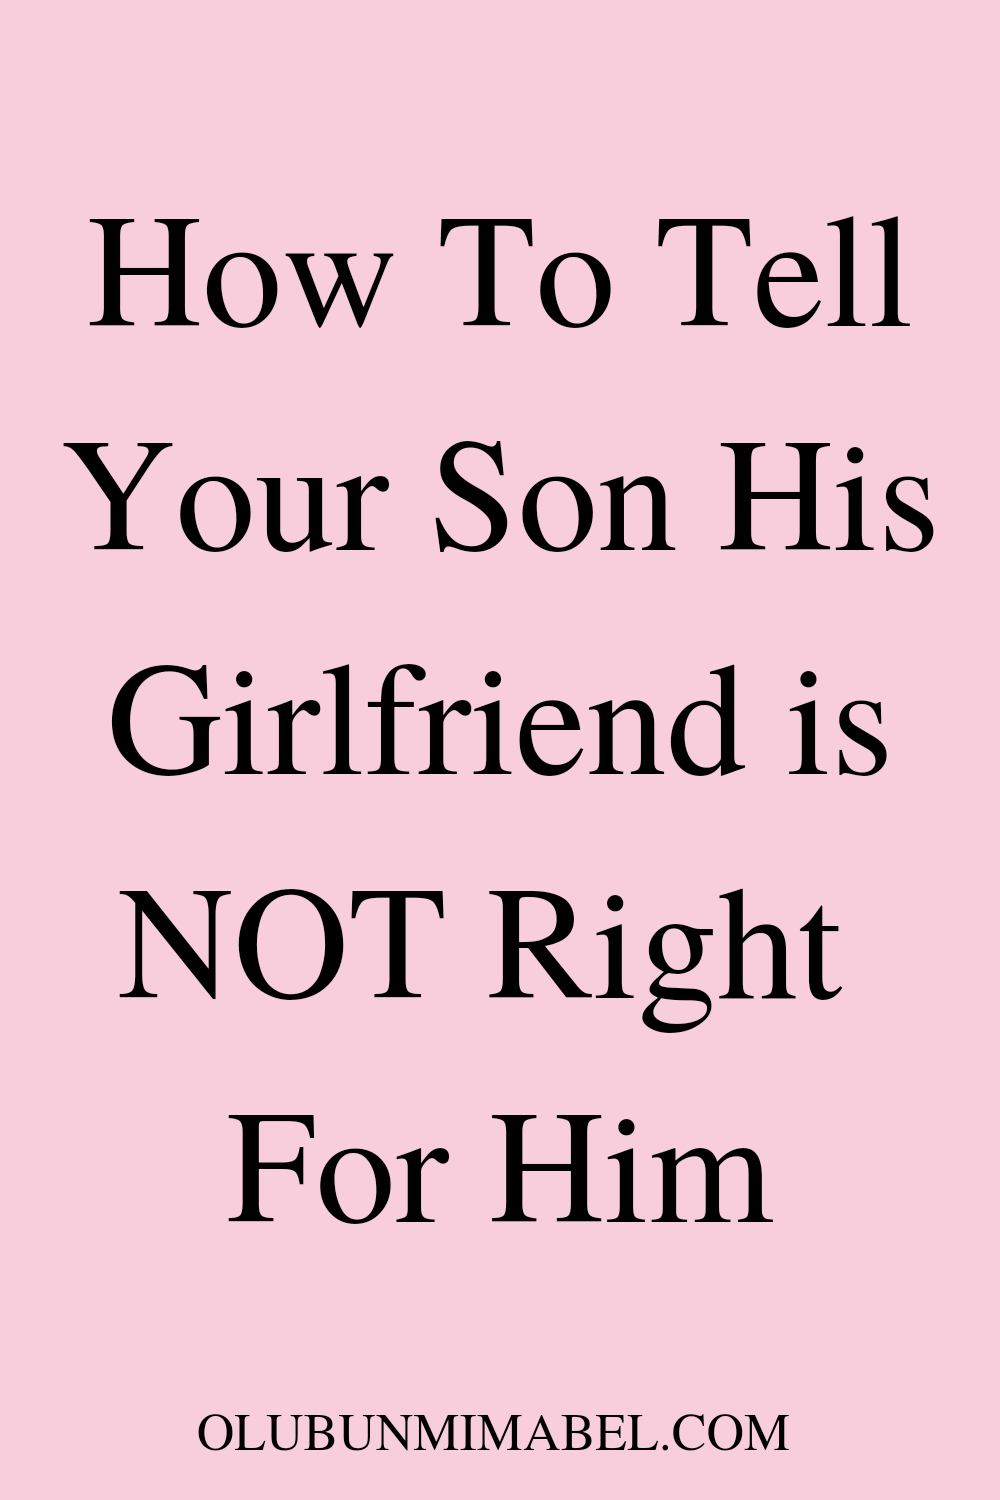 How To Tell Your Son His Girlfriend is Not Right For Him